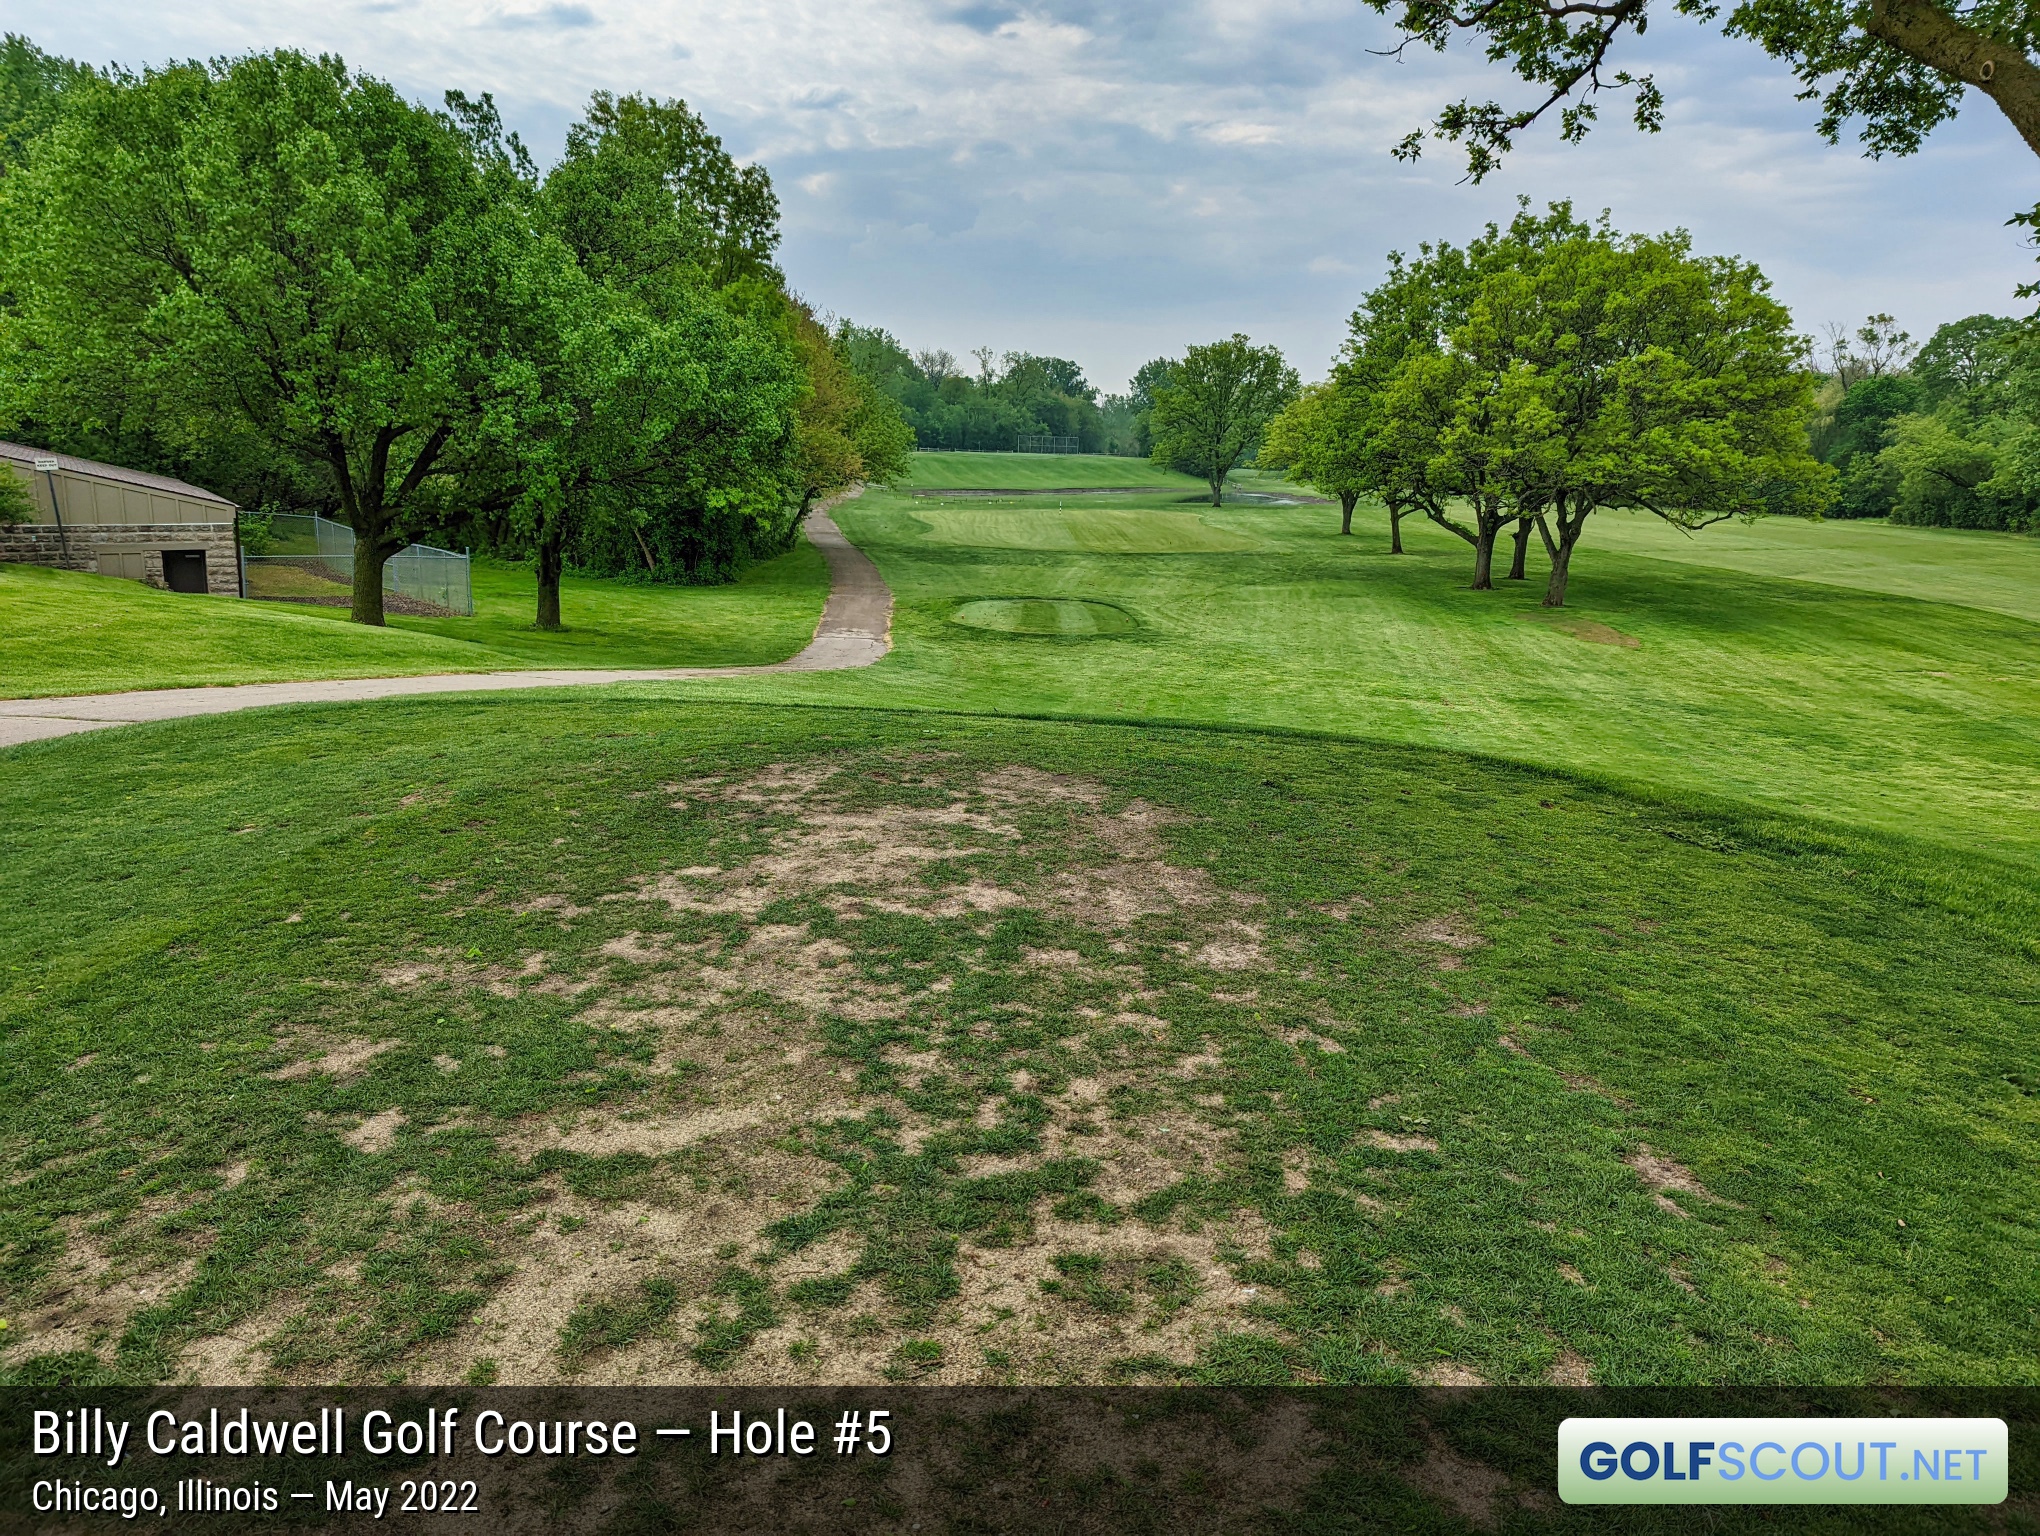 Photo of hole #5 at Billy Caldwell Golf Course in Chicago, Illinois. 